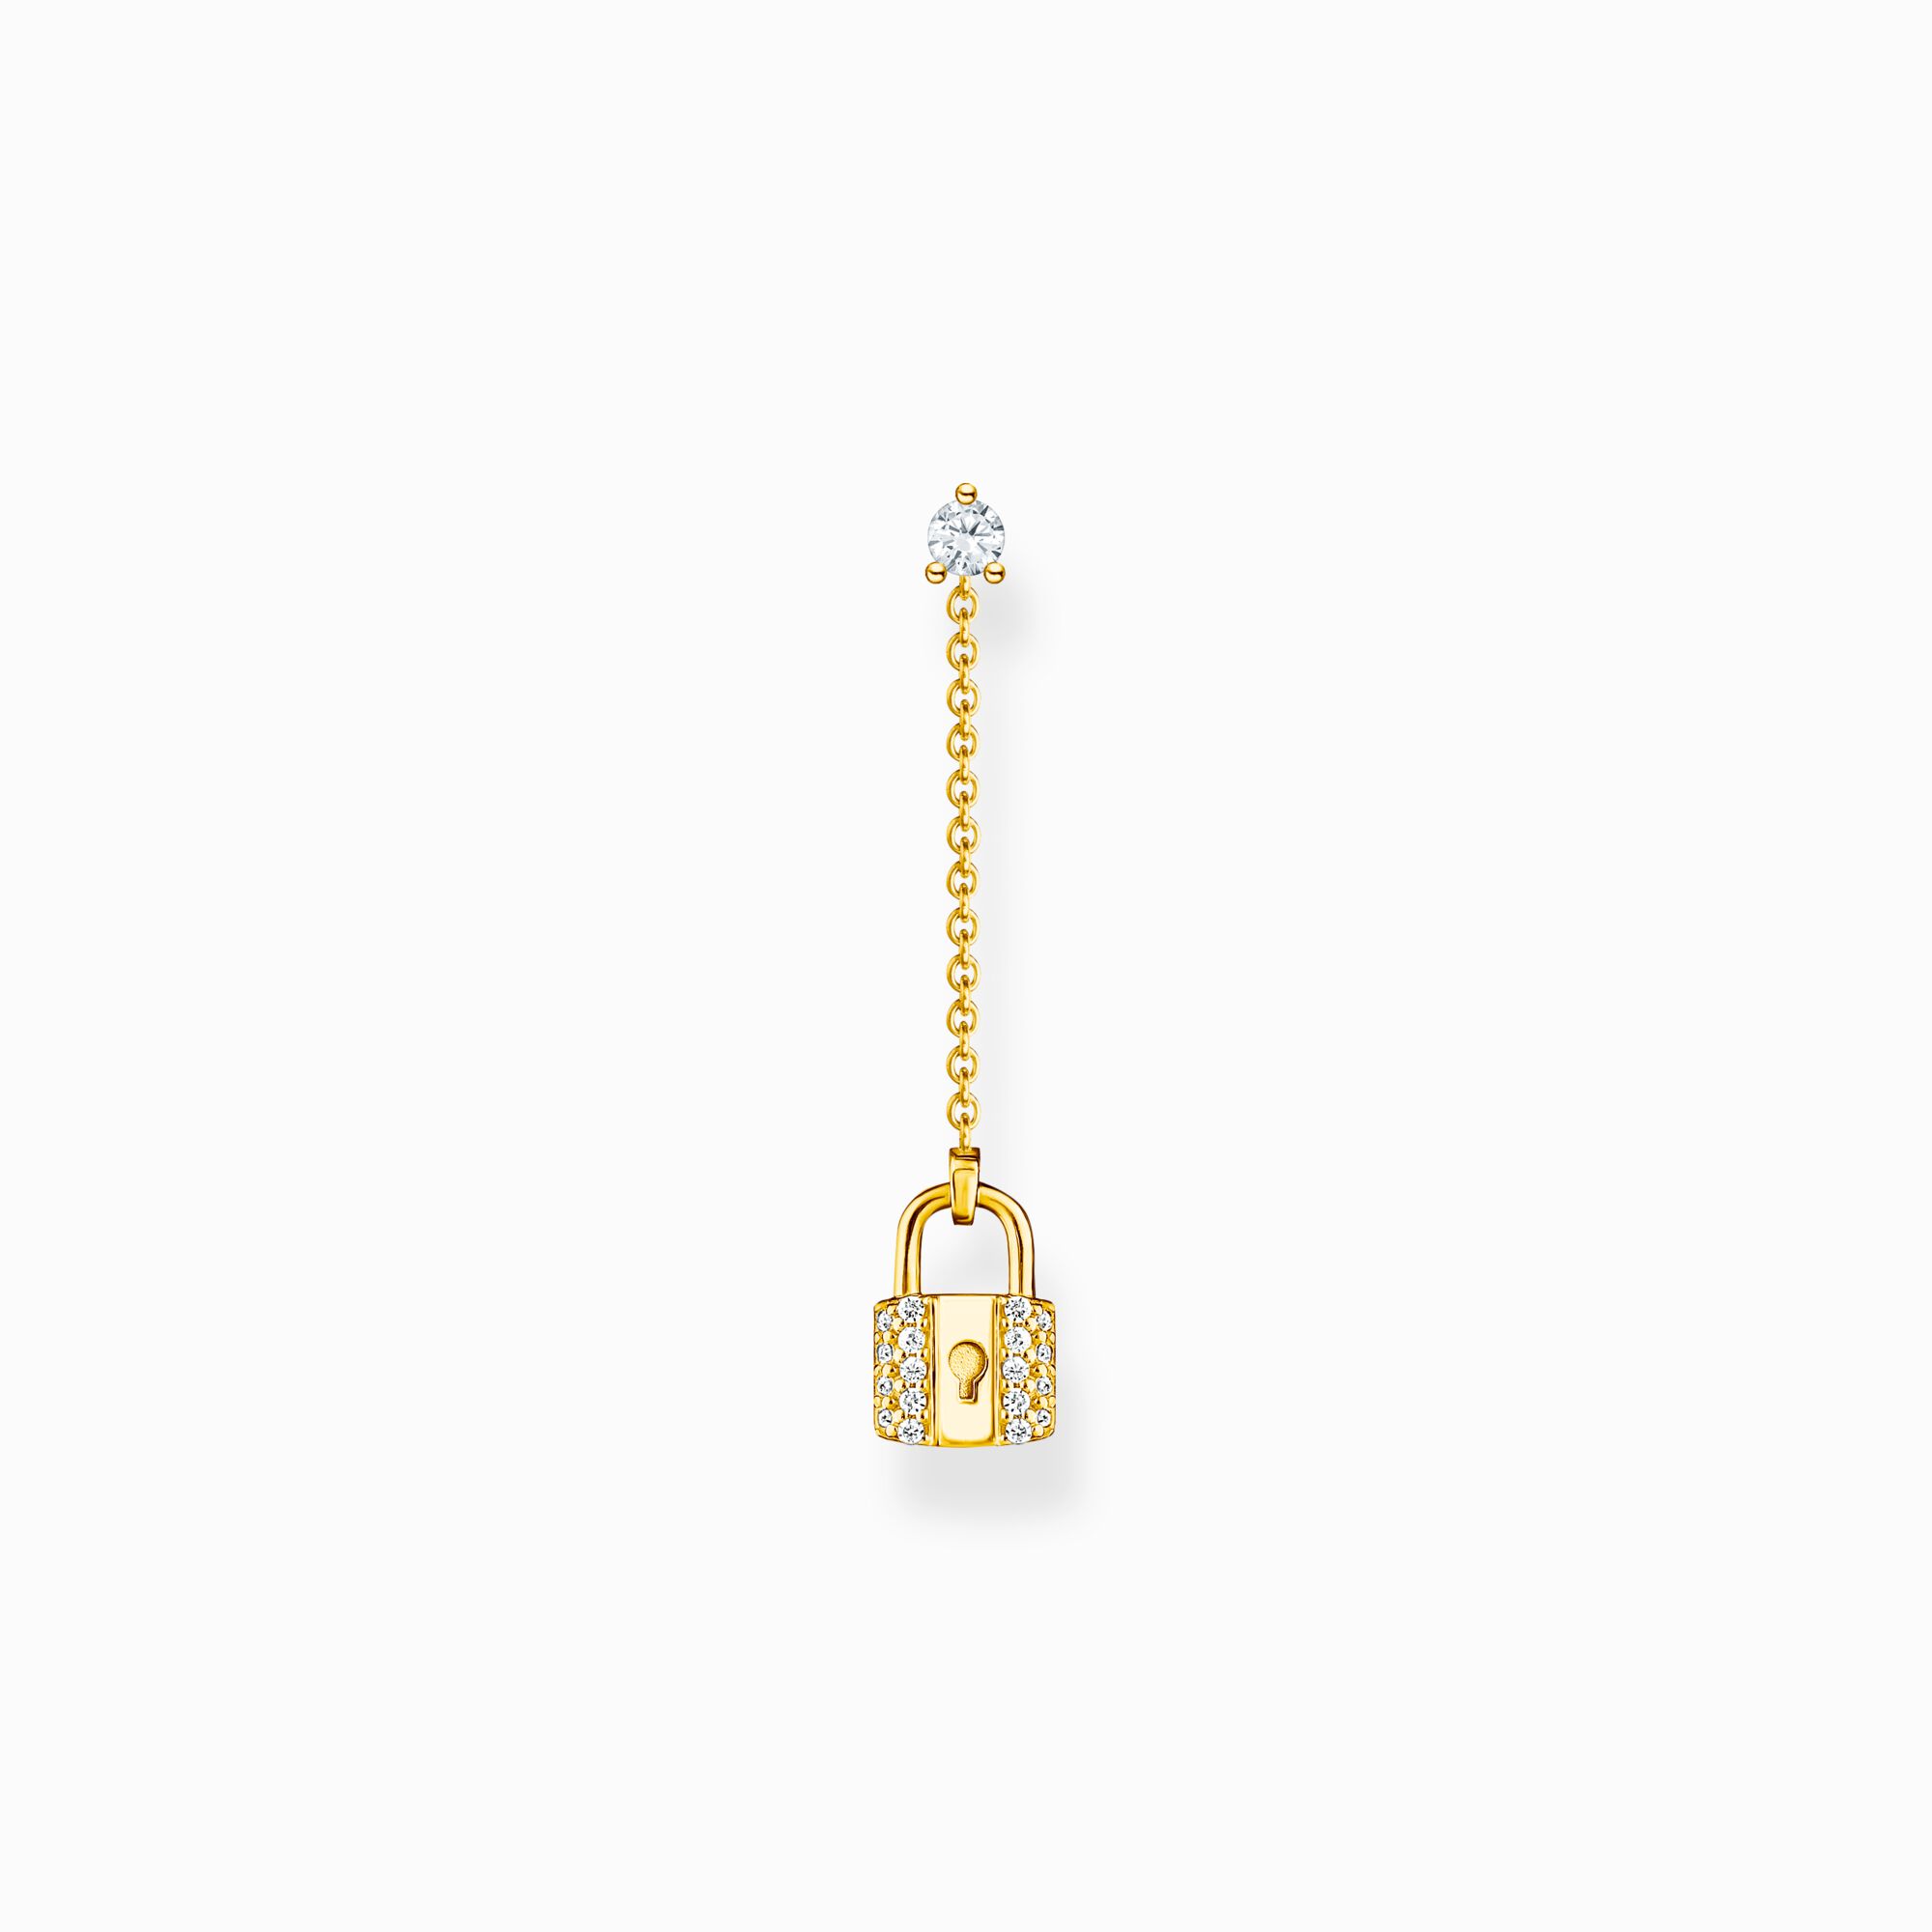 Single earring lock with white stones gold from the Charming Collection collection in the THOMAS SABO online store